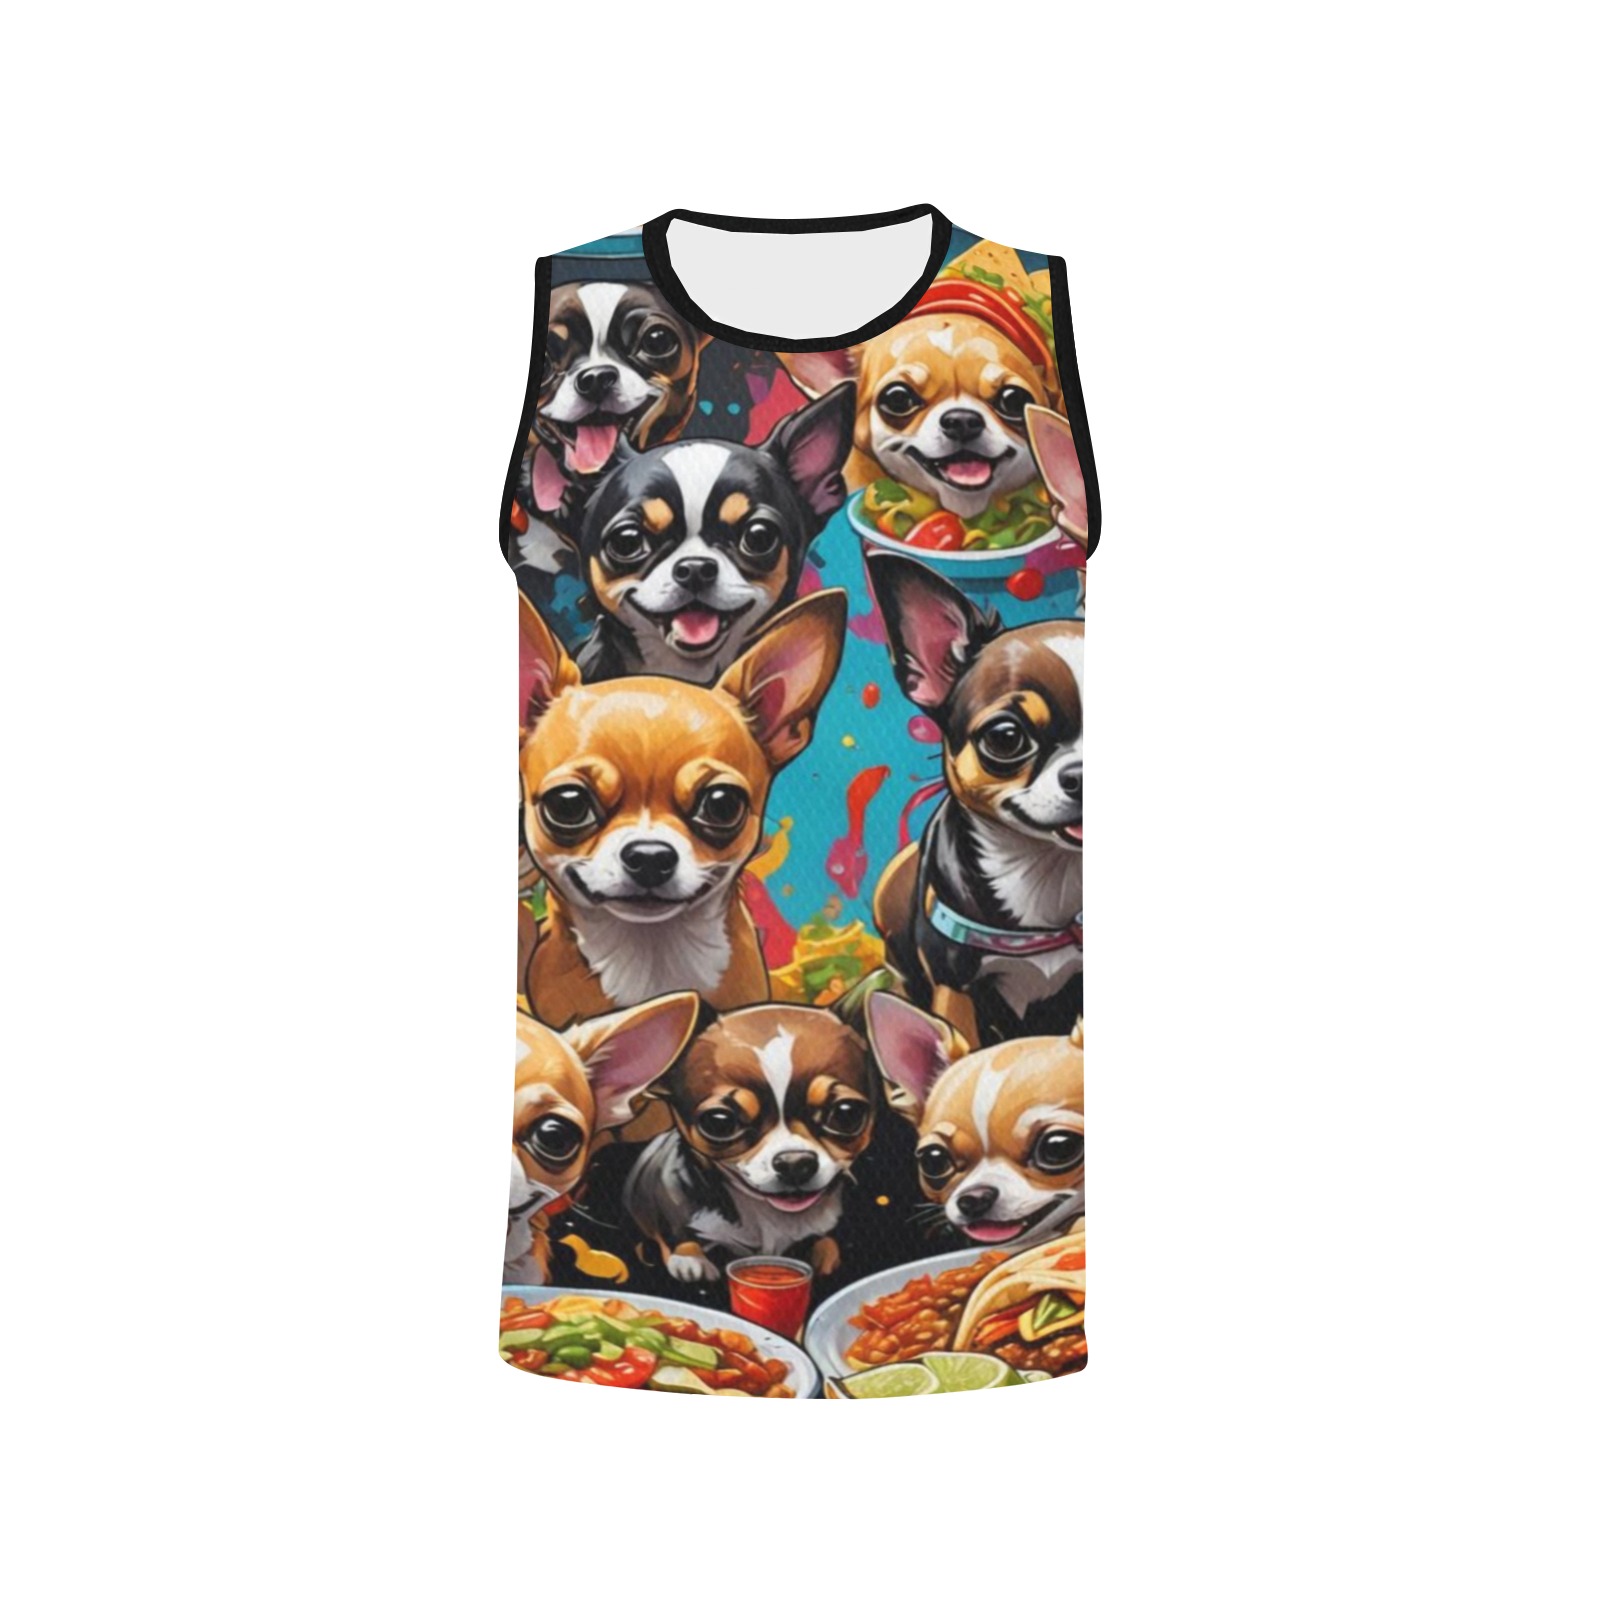 CHIHUAHUAS EATING MEXICAN FOOD 2 All Over Print Basketball Jersey